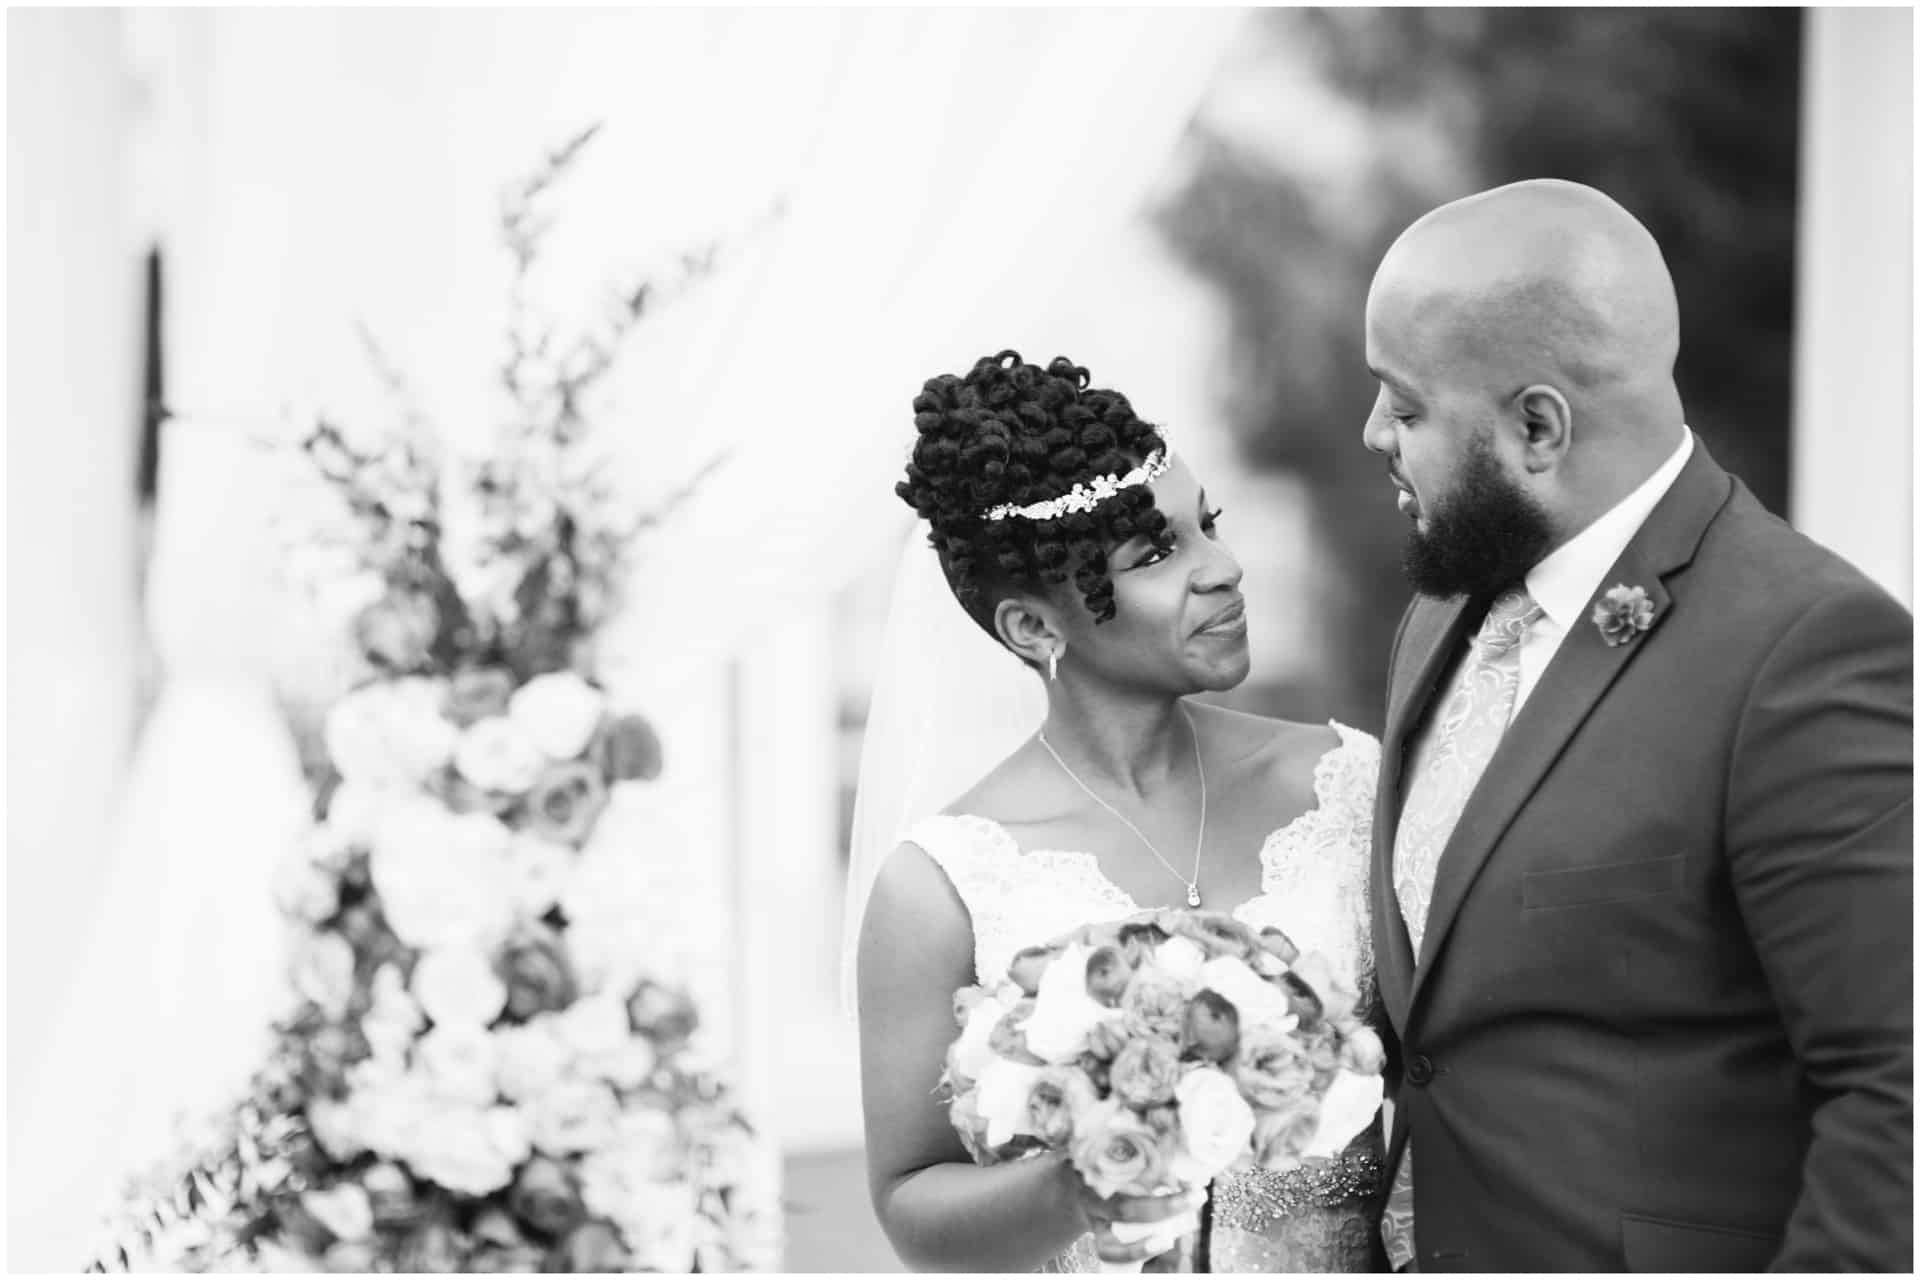 Candid black and white image of the bride and groom